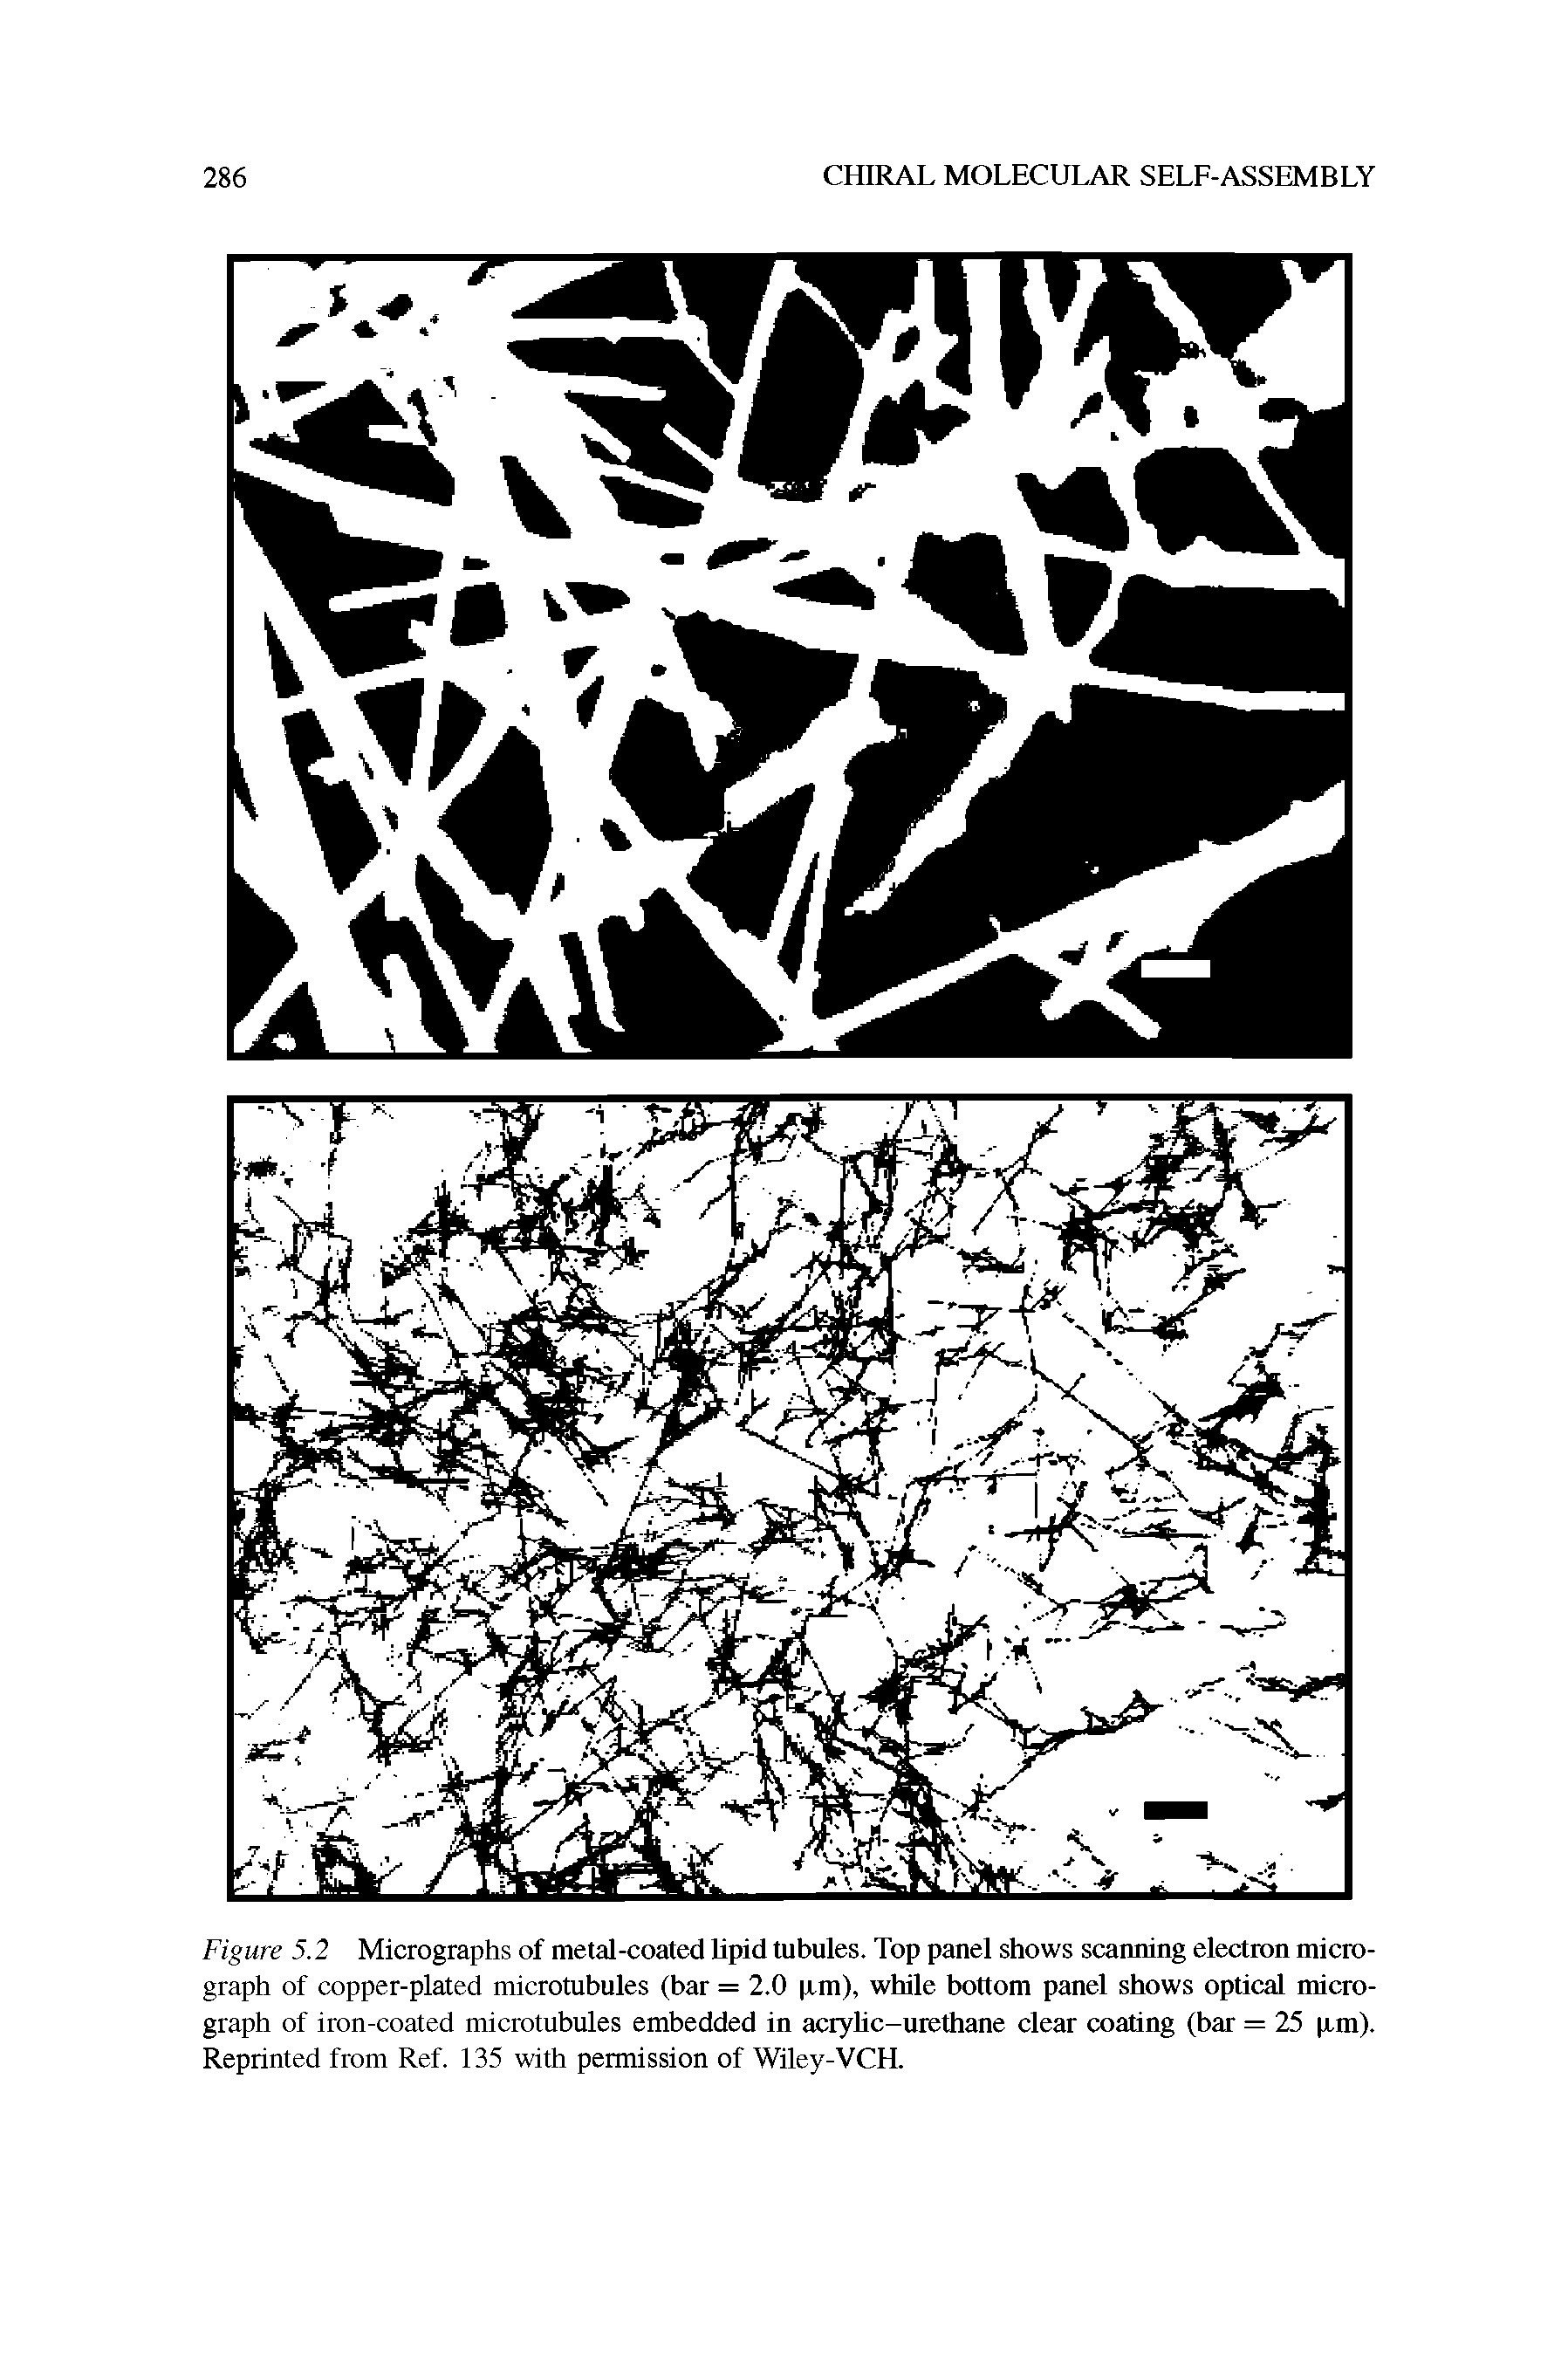 Figure 5.2 Micrographs of metal-coated lipid tubules. Top panel shows scanning electron micrograph of copper-plated microtubules (bar = 2.0 (Jim), while bottom panel shows optical micrograph of iron-coated microtubules embedded in acrylic-urethane clear coating (bar = 25 p,m). Reprinted from Ref. 135 with permission of Wiley-VCH.